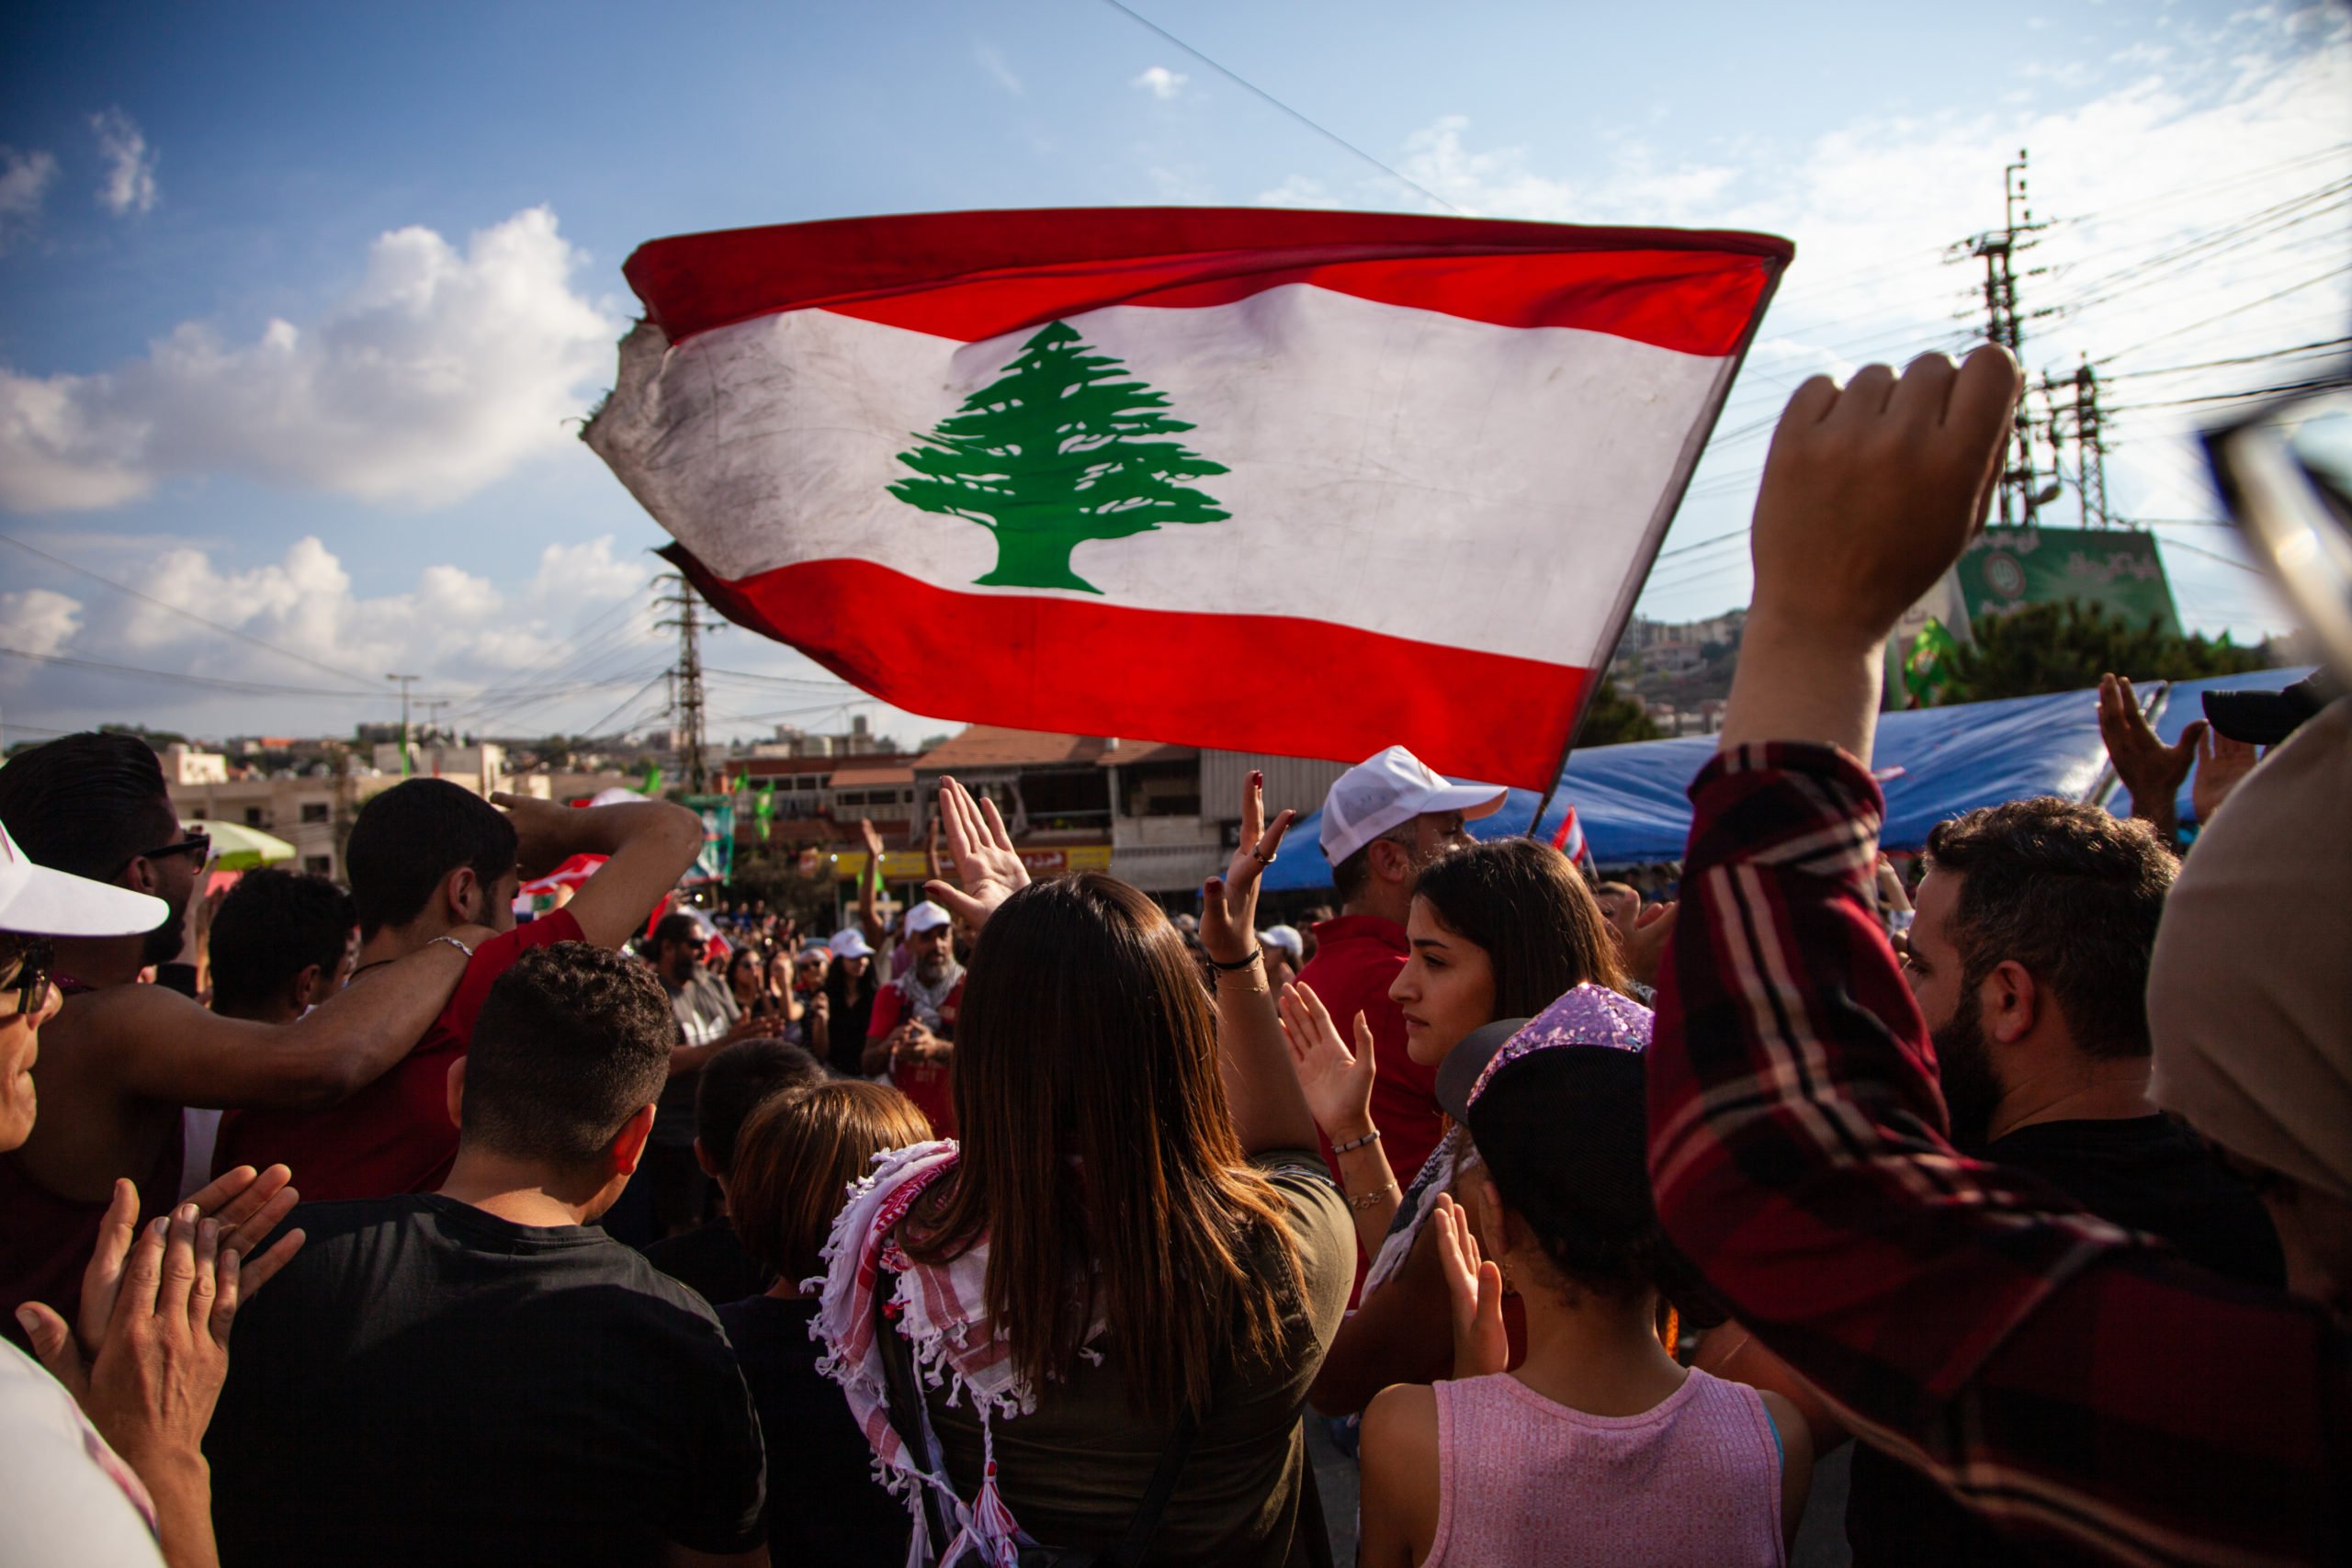 Bitcoin provides an alternative to a Lebanese financial system on the brink